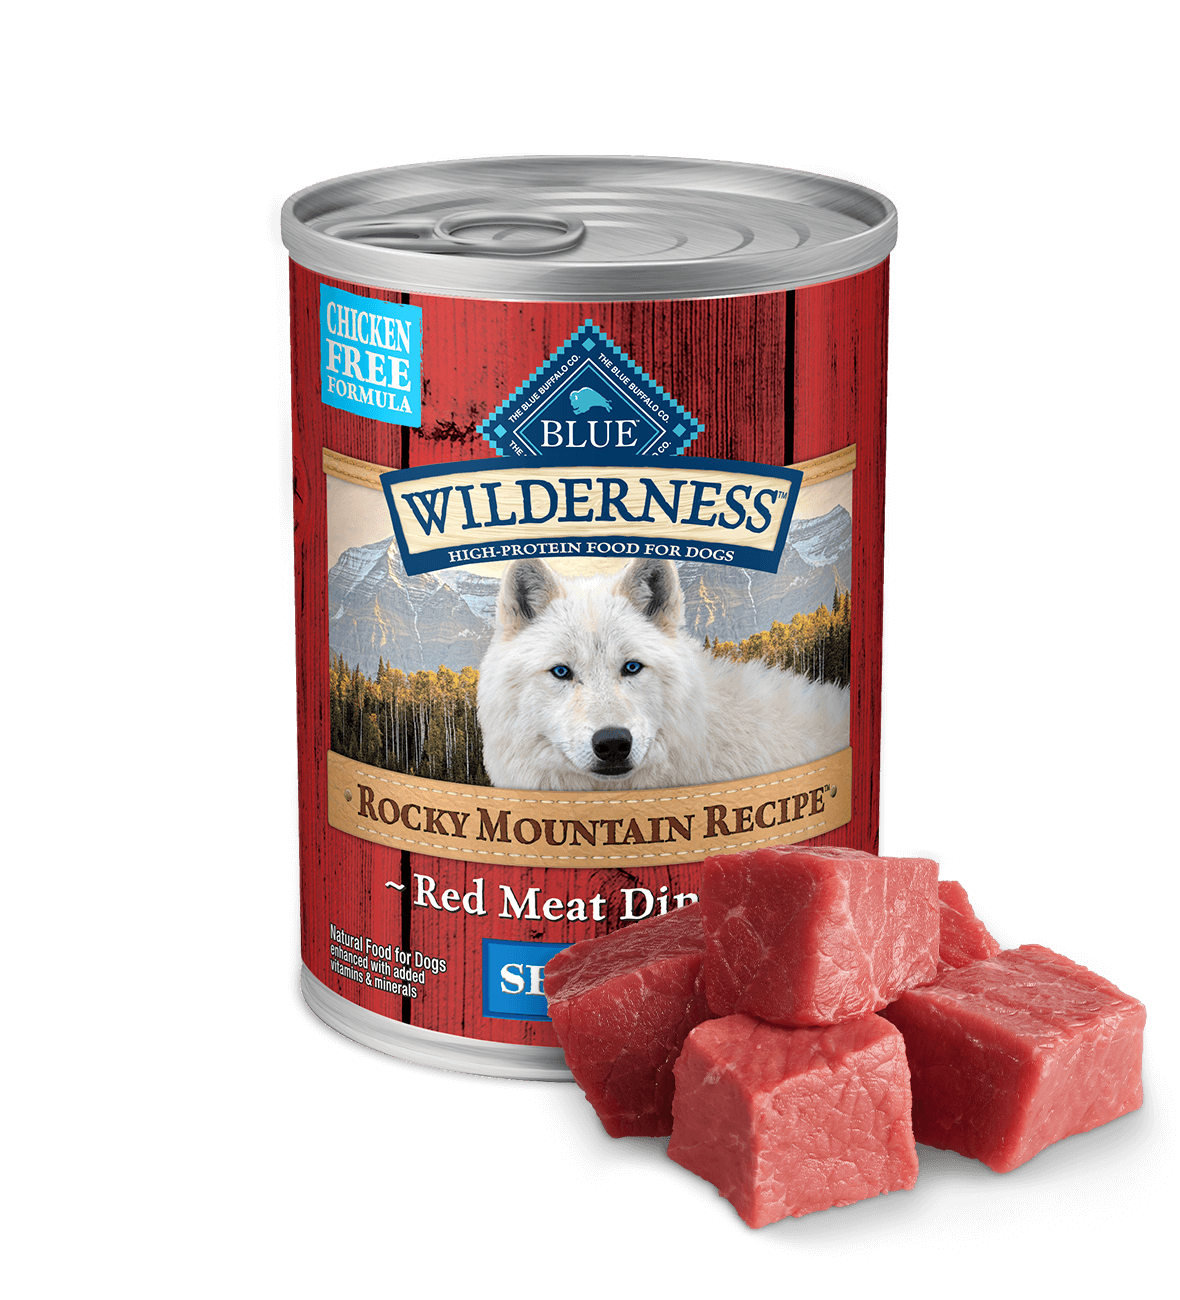 Can of wet dog food